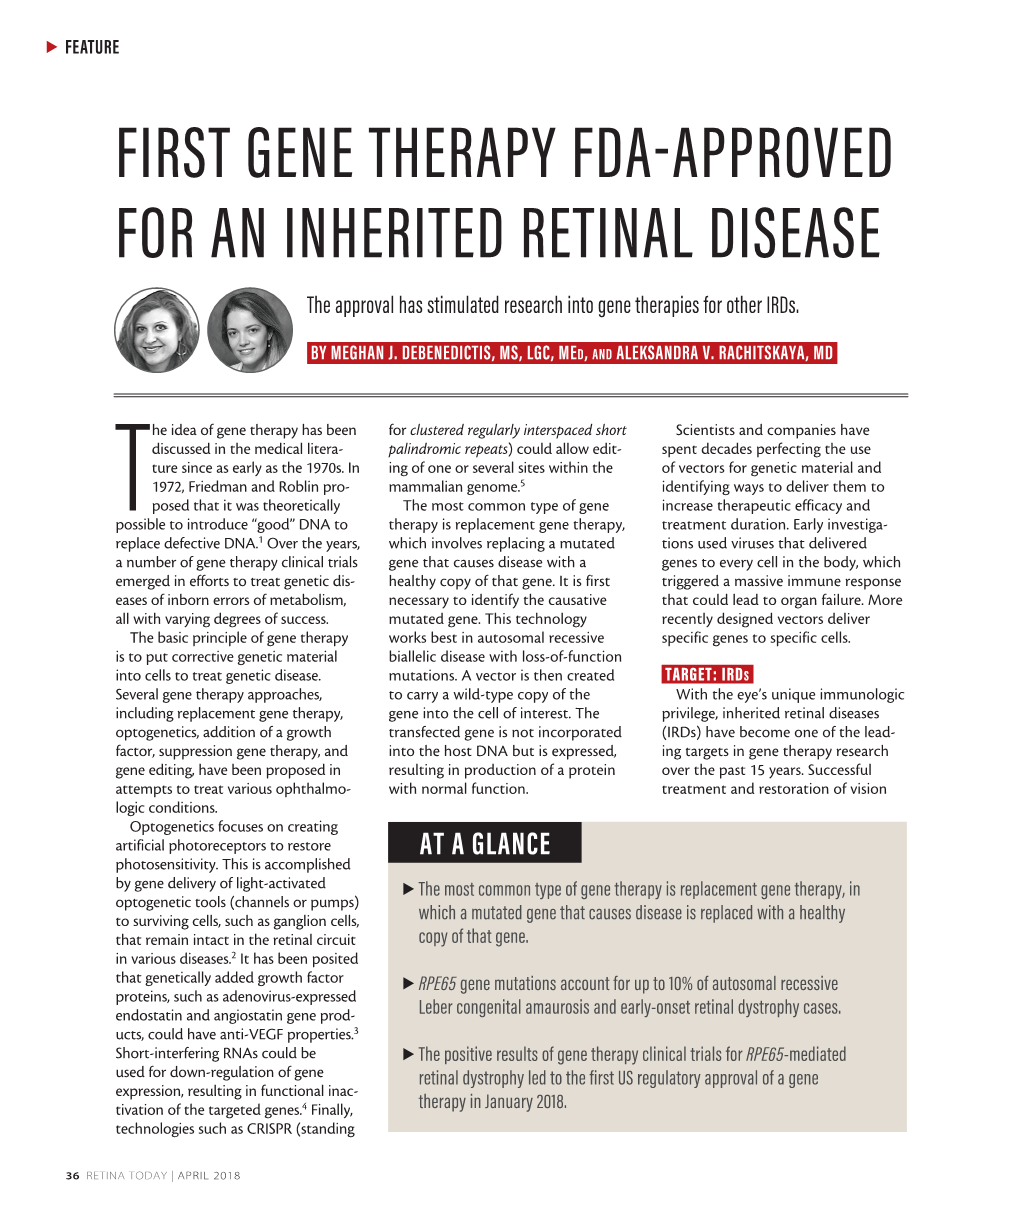 First Gene Therapy Fda-Approved for An